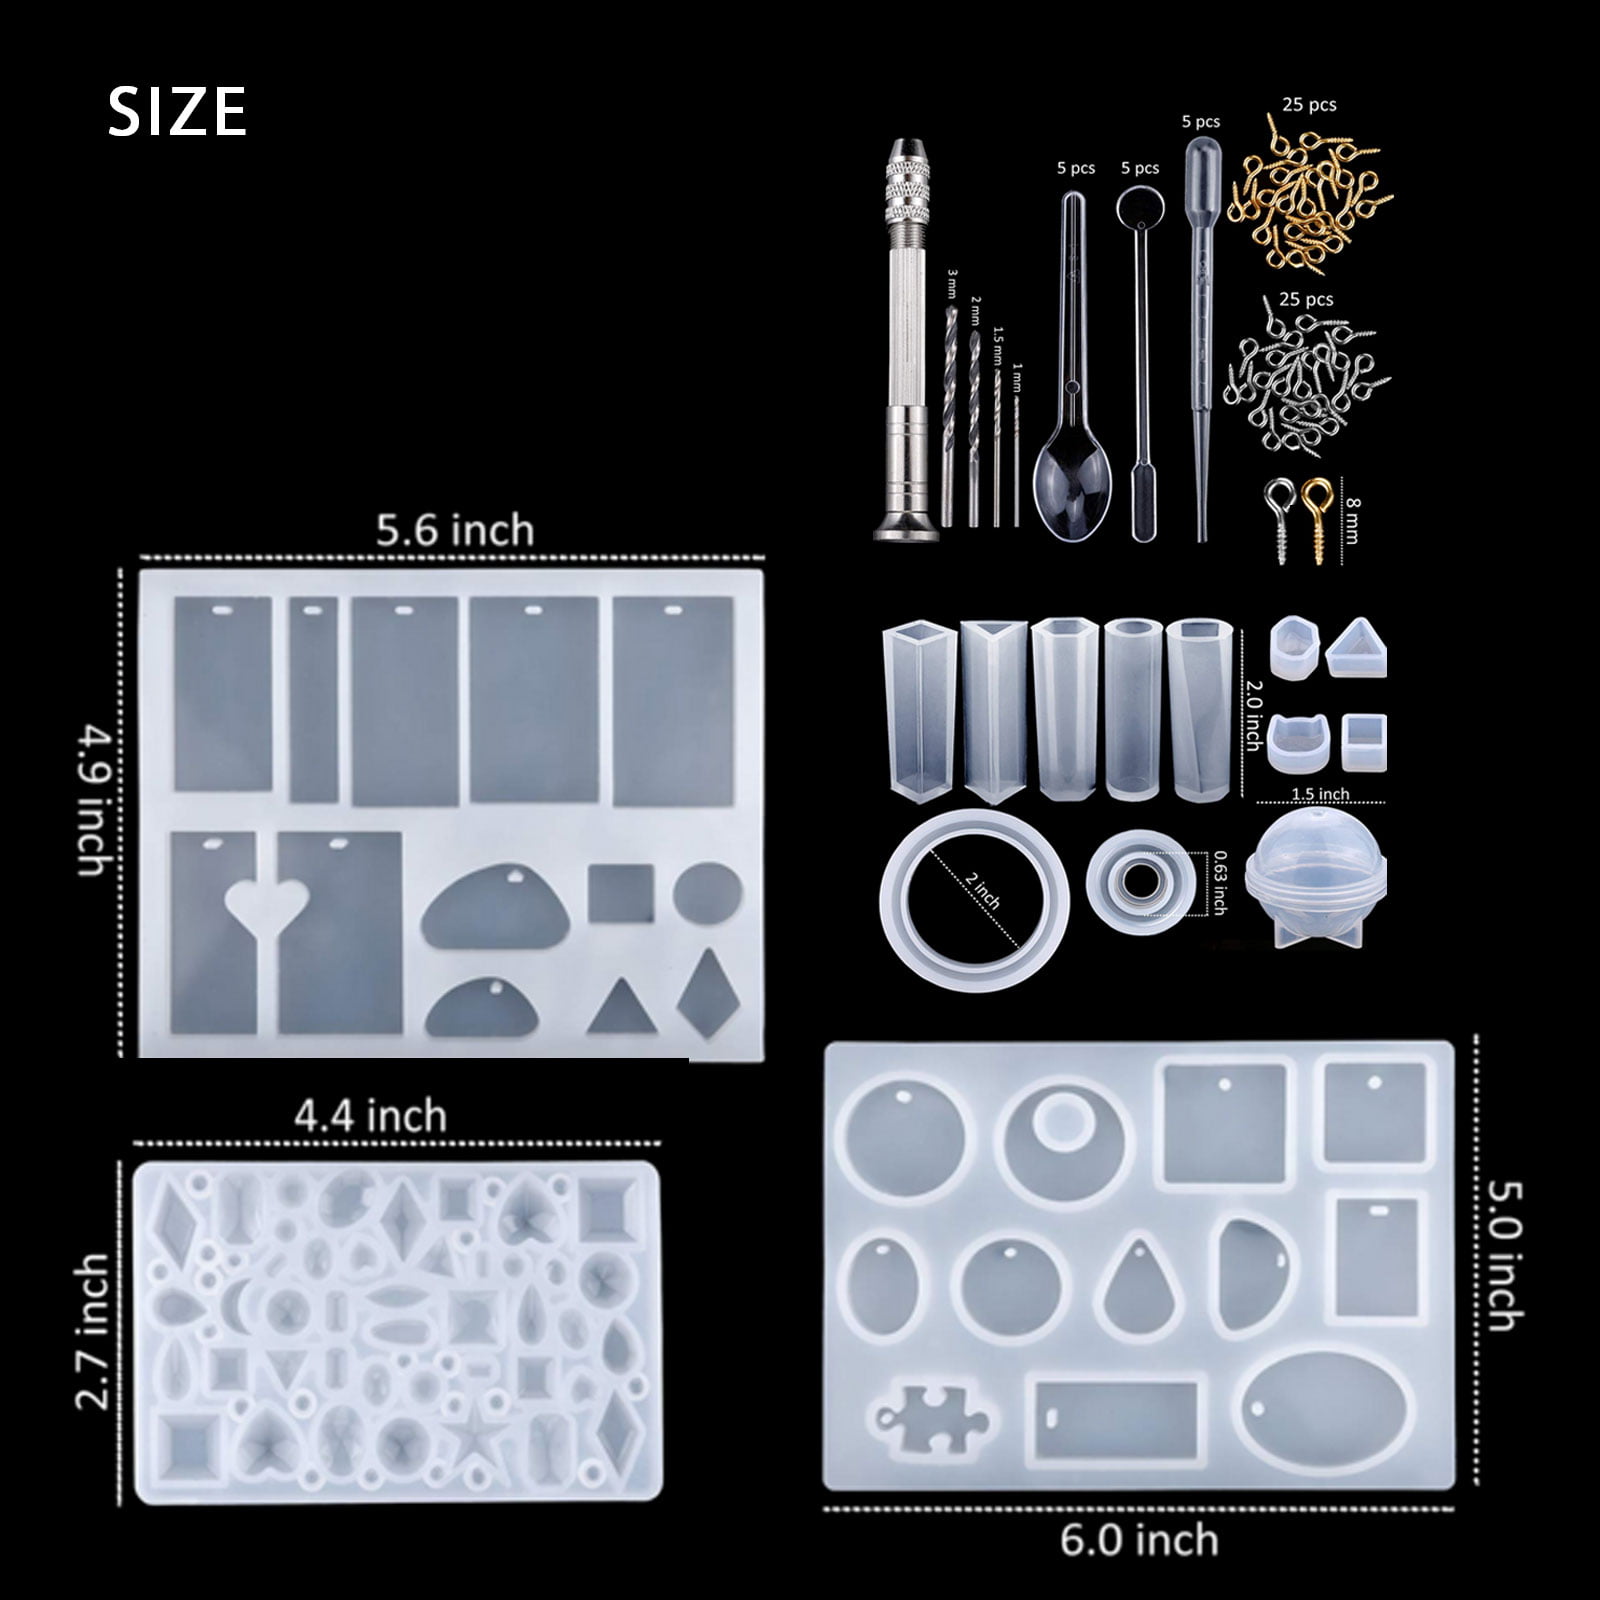 35pcs Resin Jewelry Molds, EEEkit Jewelry Casting Molds, Pendant Trays Making Kit, Silicone Molds for DIY Resin Pendants, Keychains, Earrings, Resin